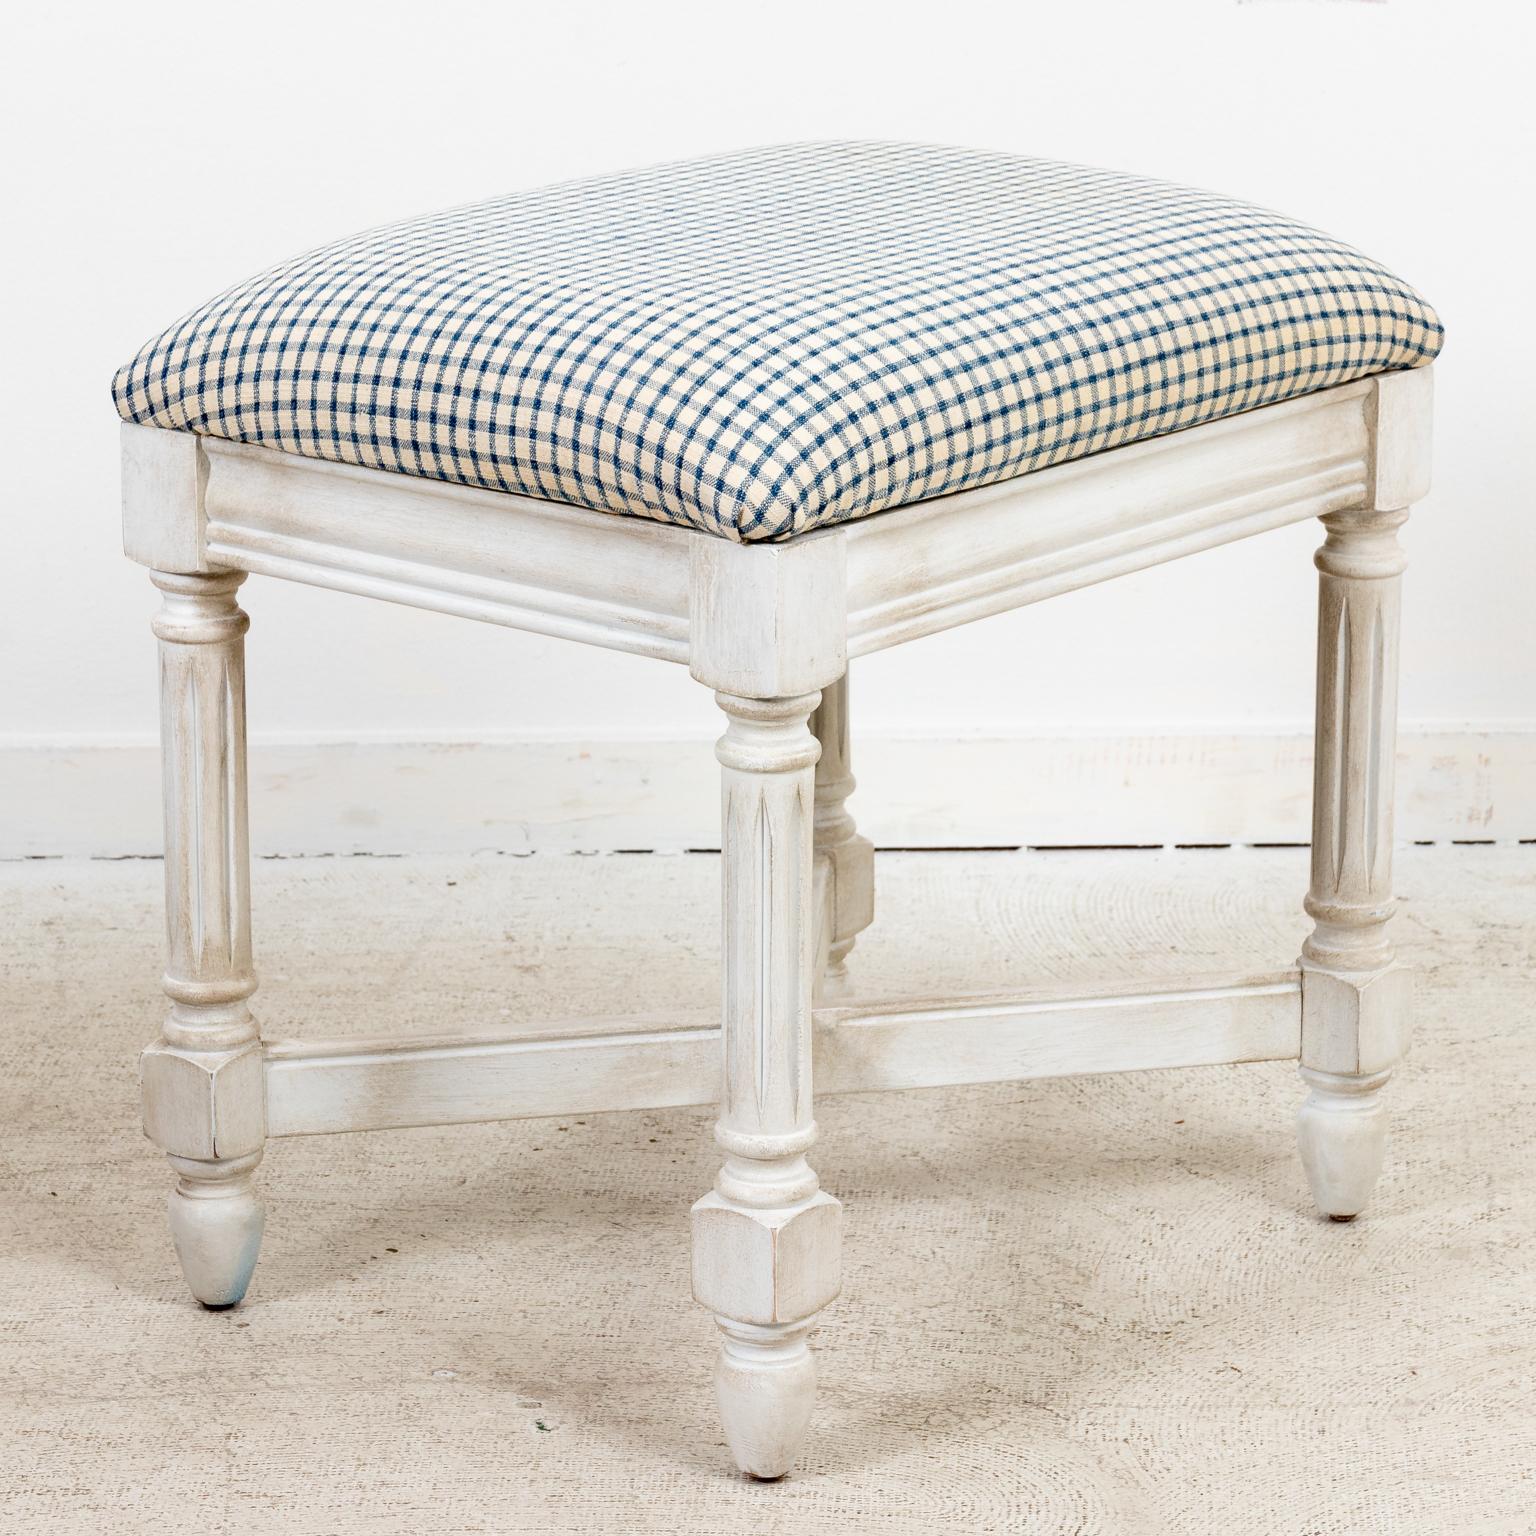 Circa 1970s newly repainted petite Maple bench in the Gustavian style with an x-shaped bottom stretcher and fluted turned legs. Newly re-upholstered with antique homespun cloth in blue and cream check pattern. Made in the United States. Please note